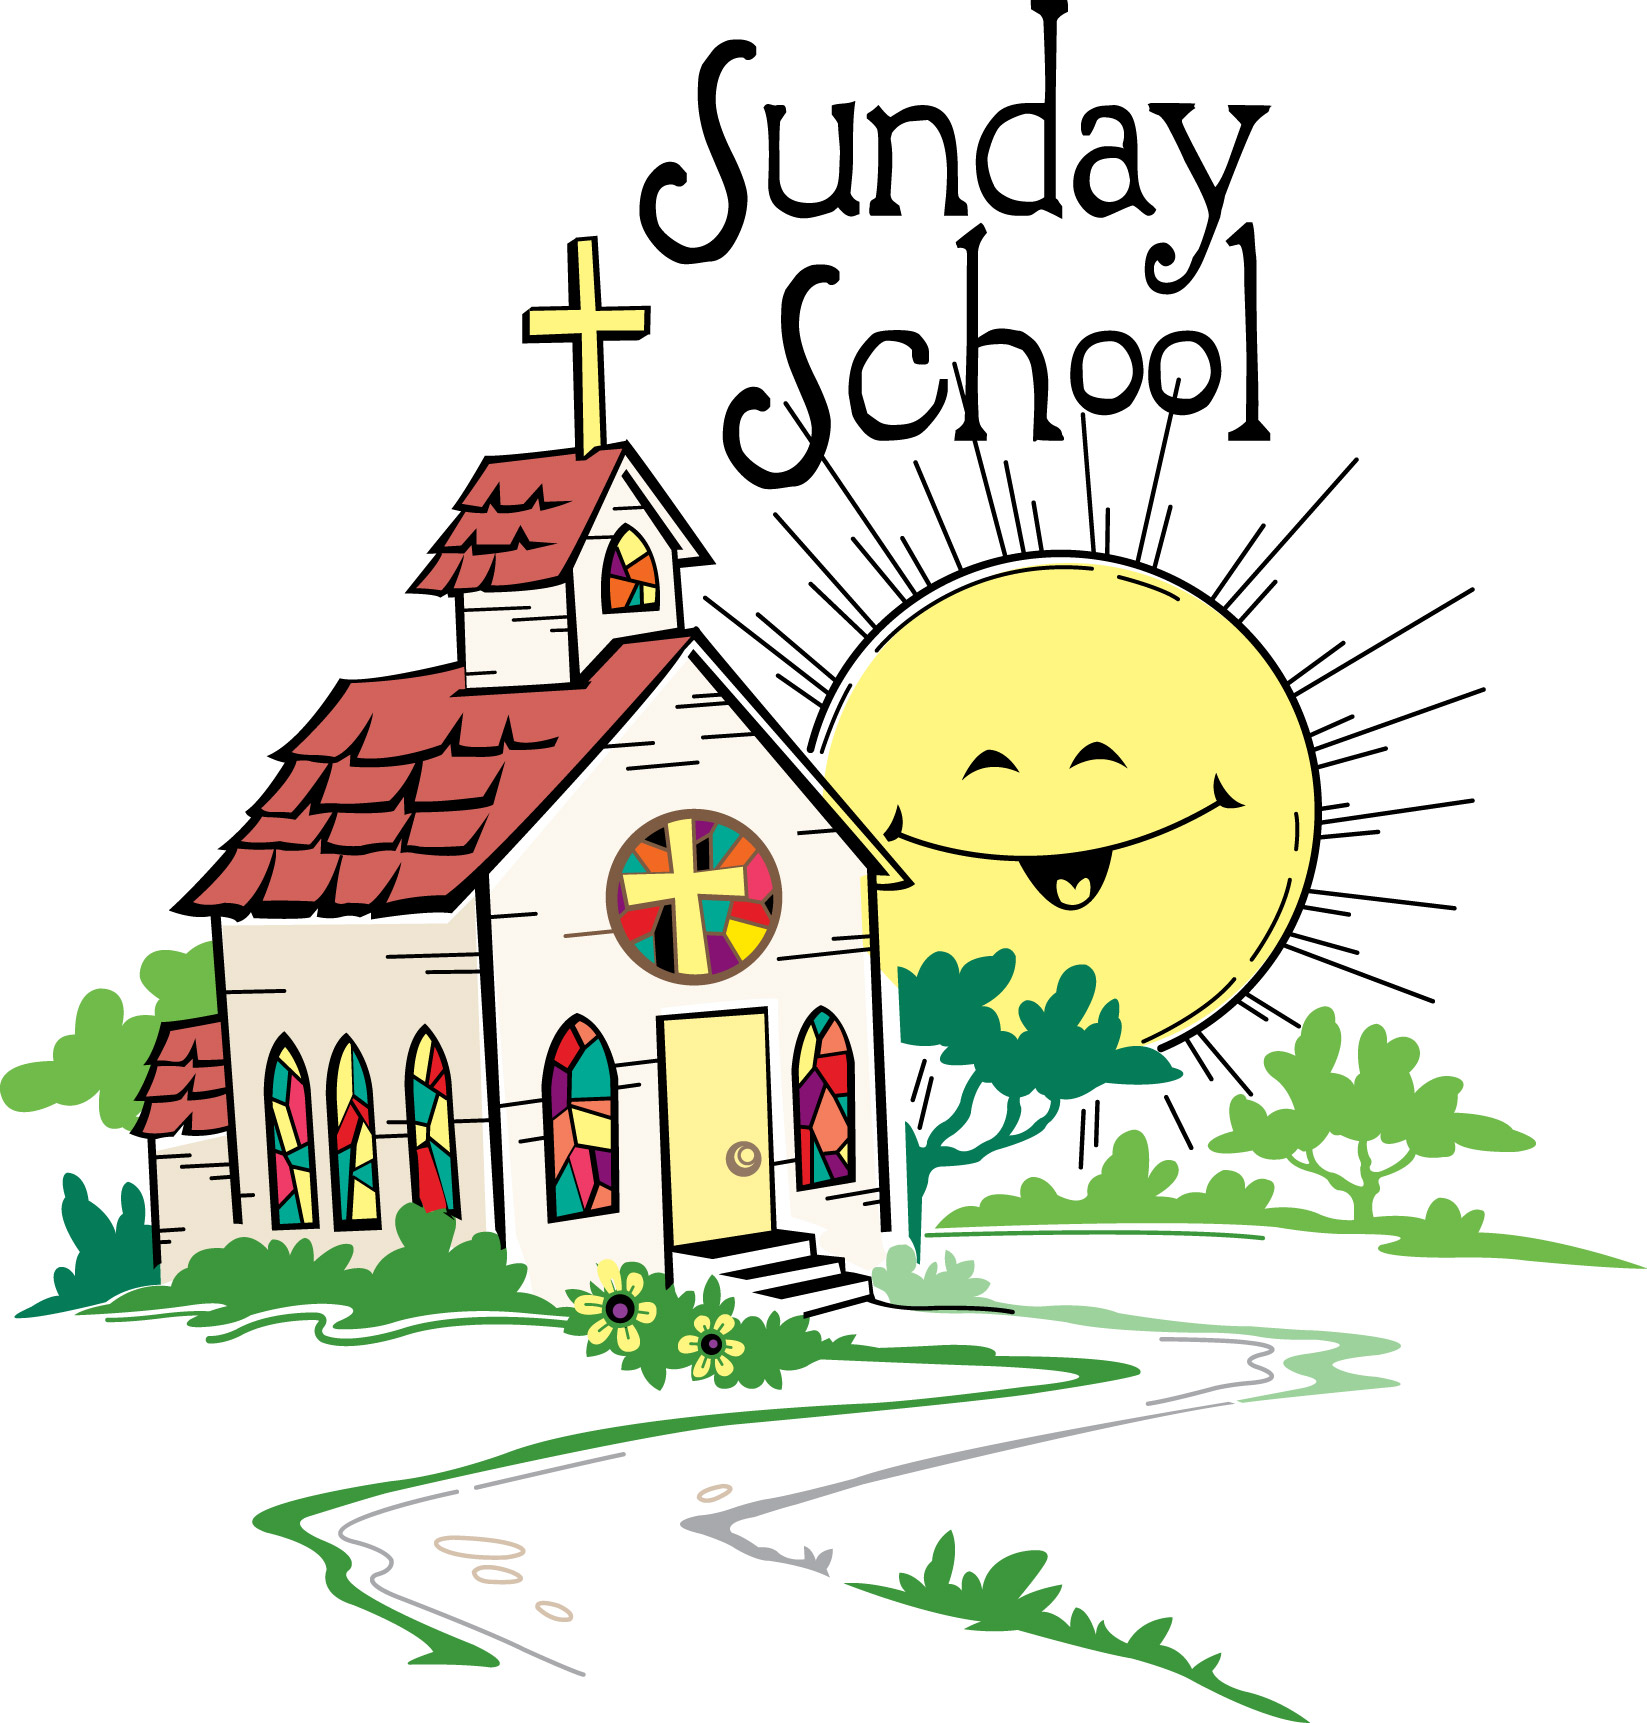 free sunday school clipart black and white - photo #8